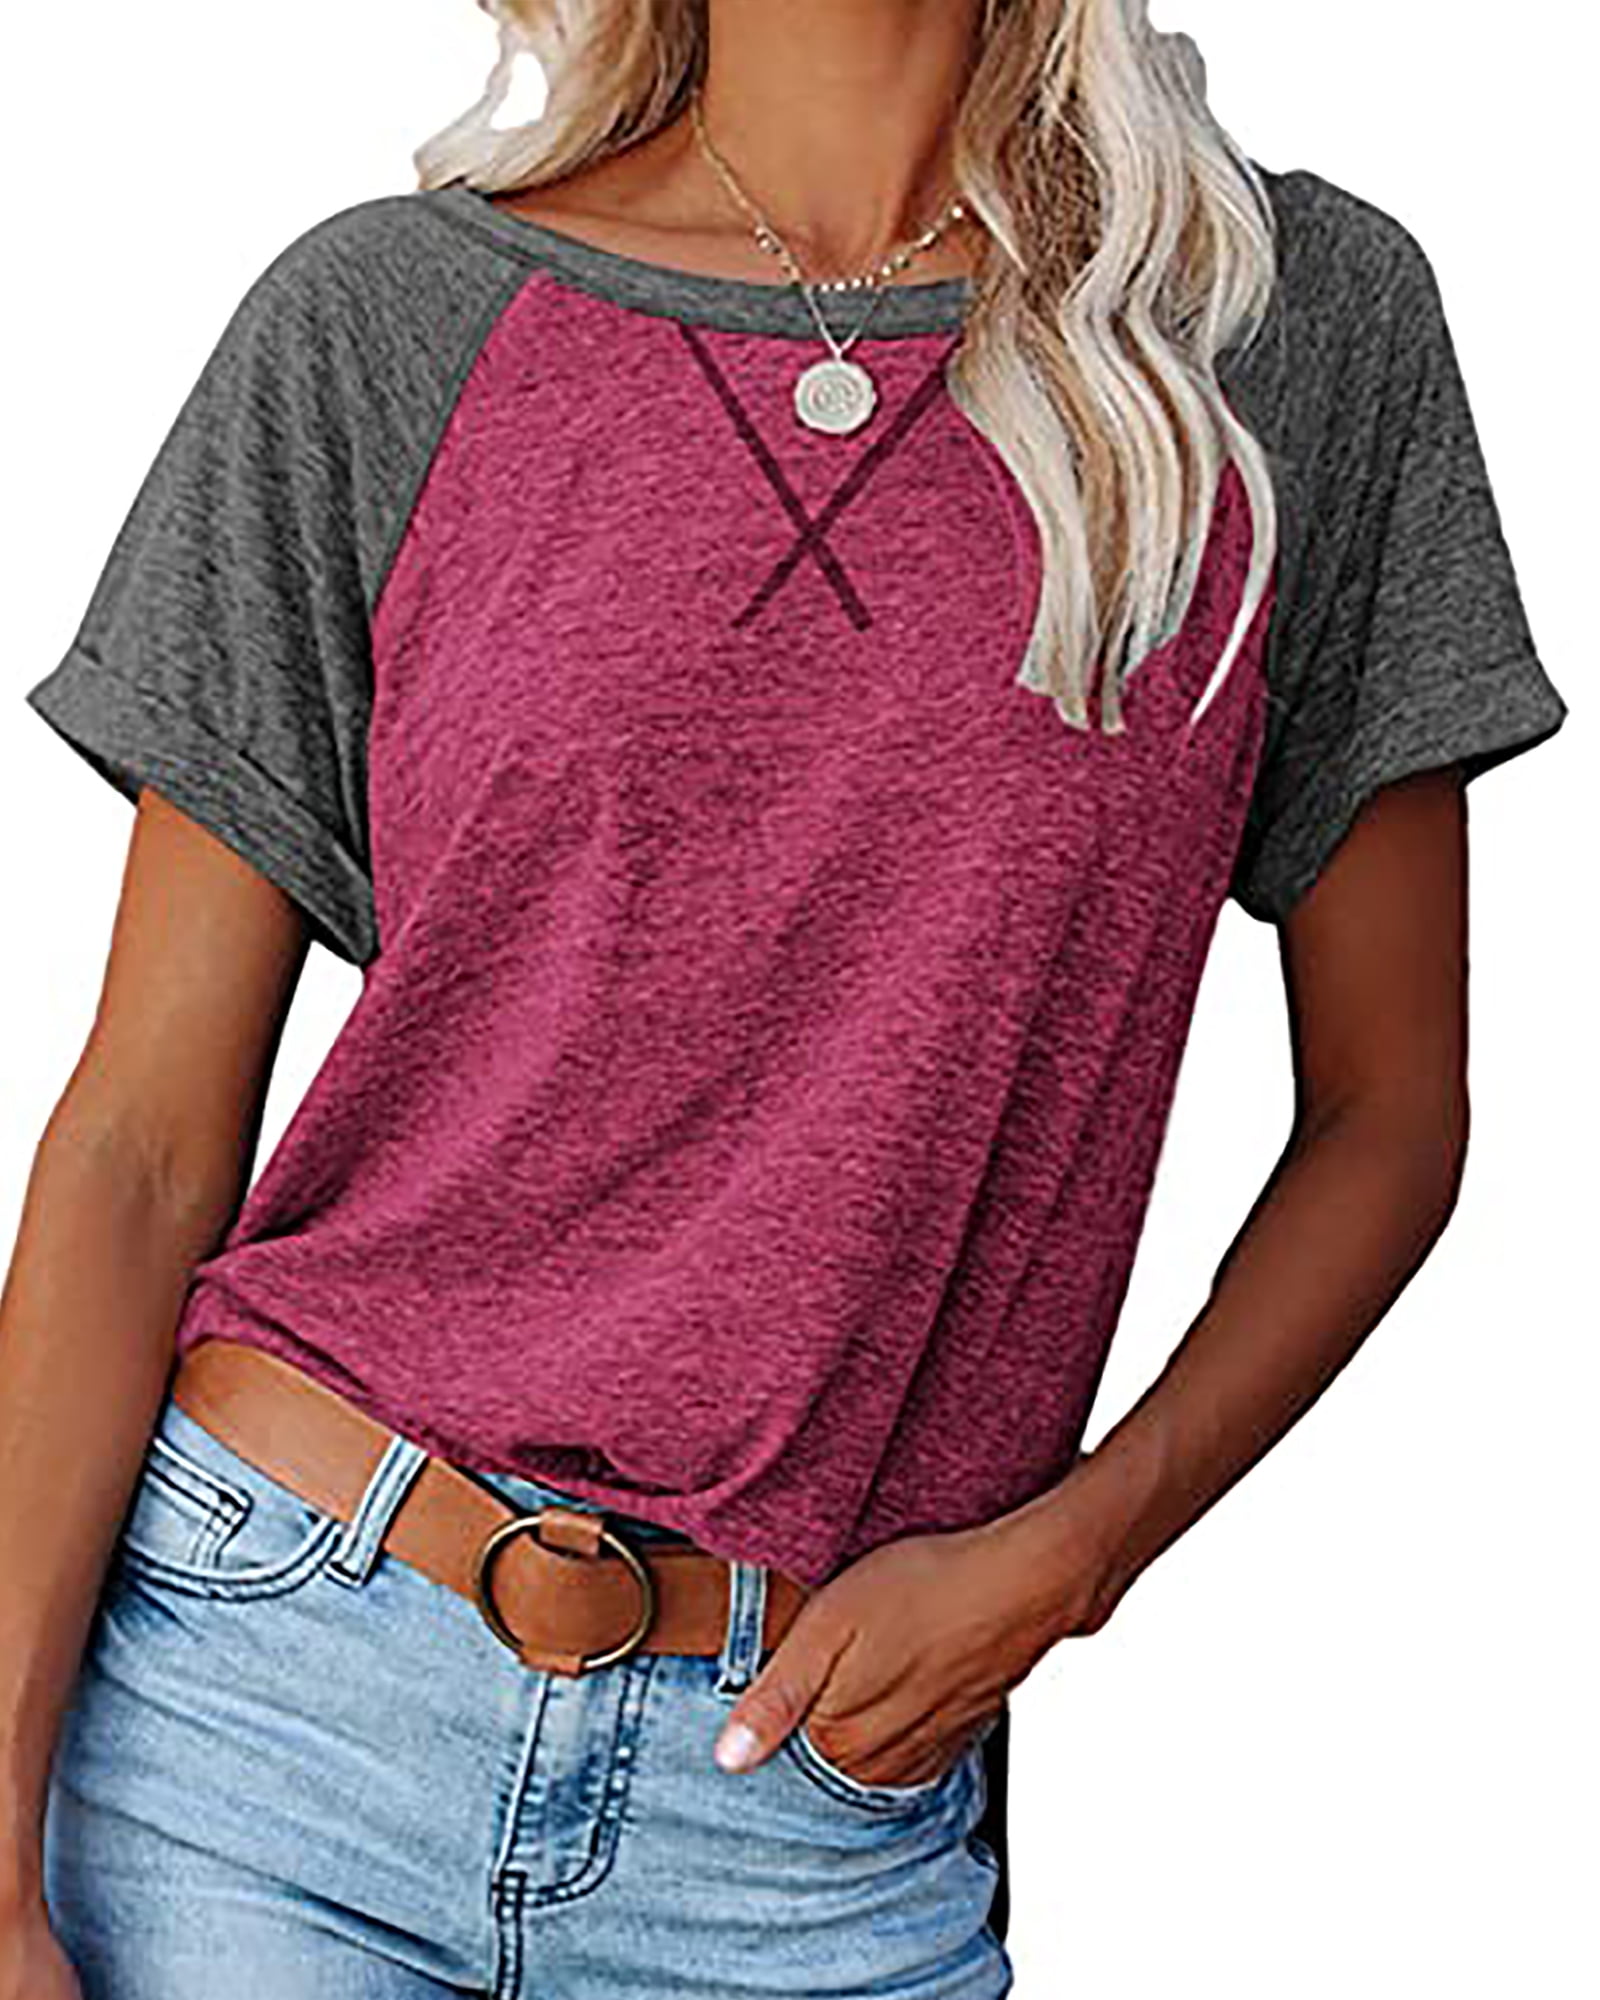 SHIBEVER Women's Tops Summer Short Sleeve T Shirts Casual Loose Side ...